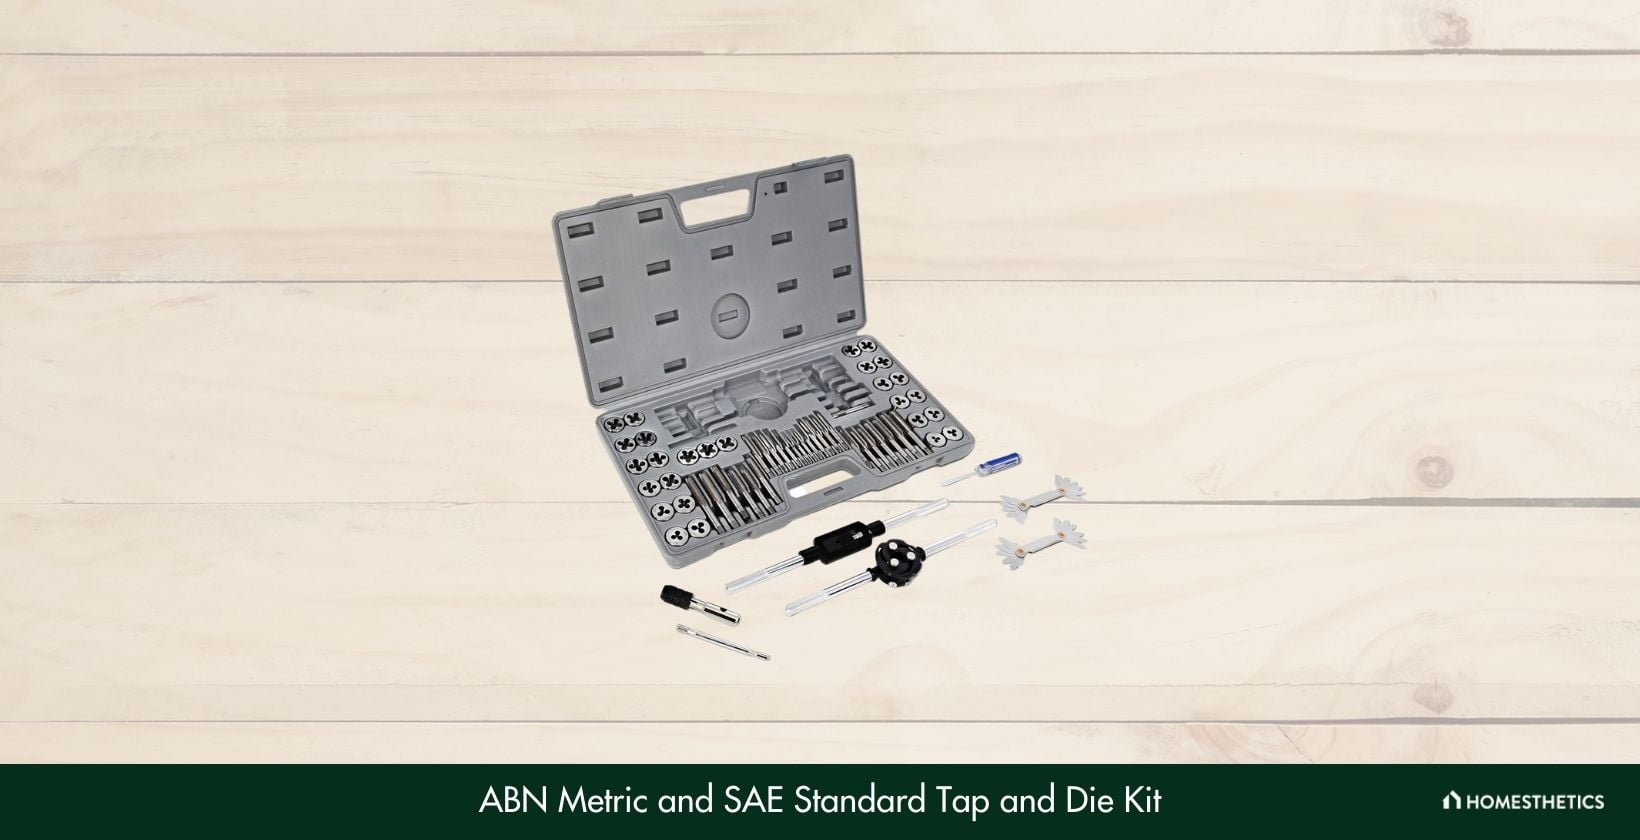 ABN Metric and SAE Standard Tap and Die Kit